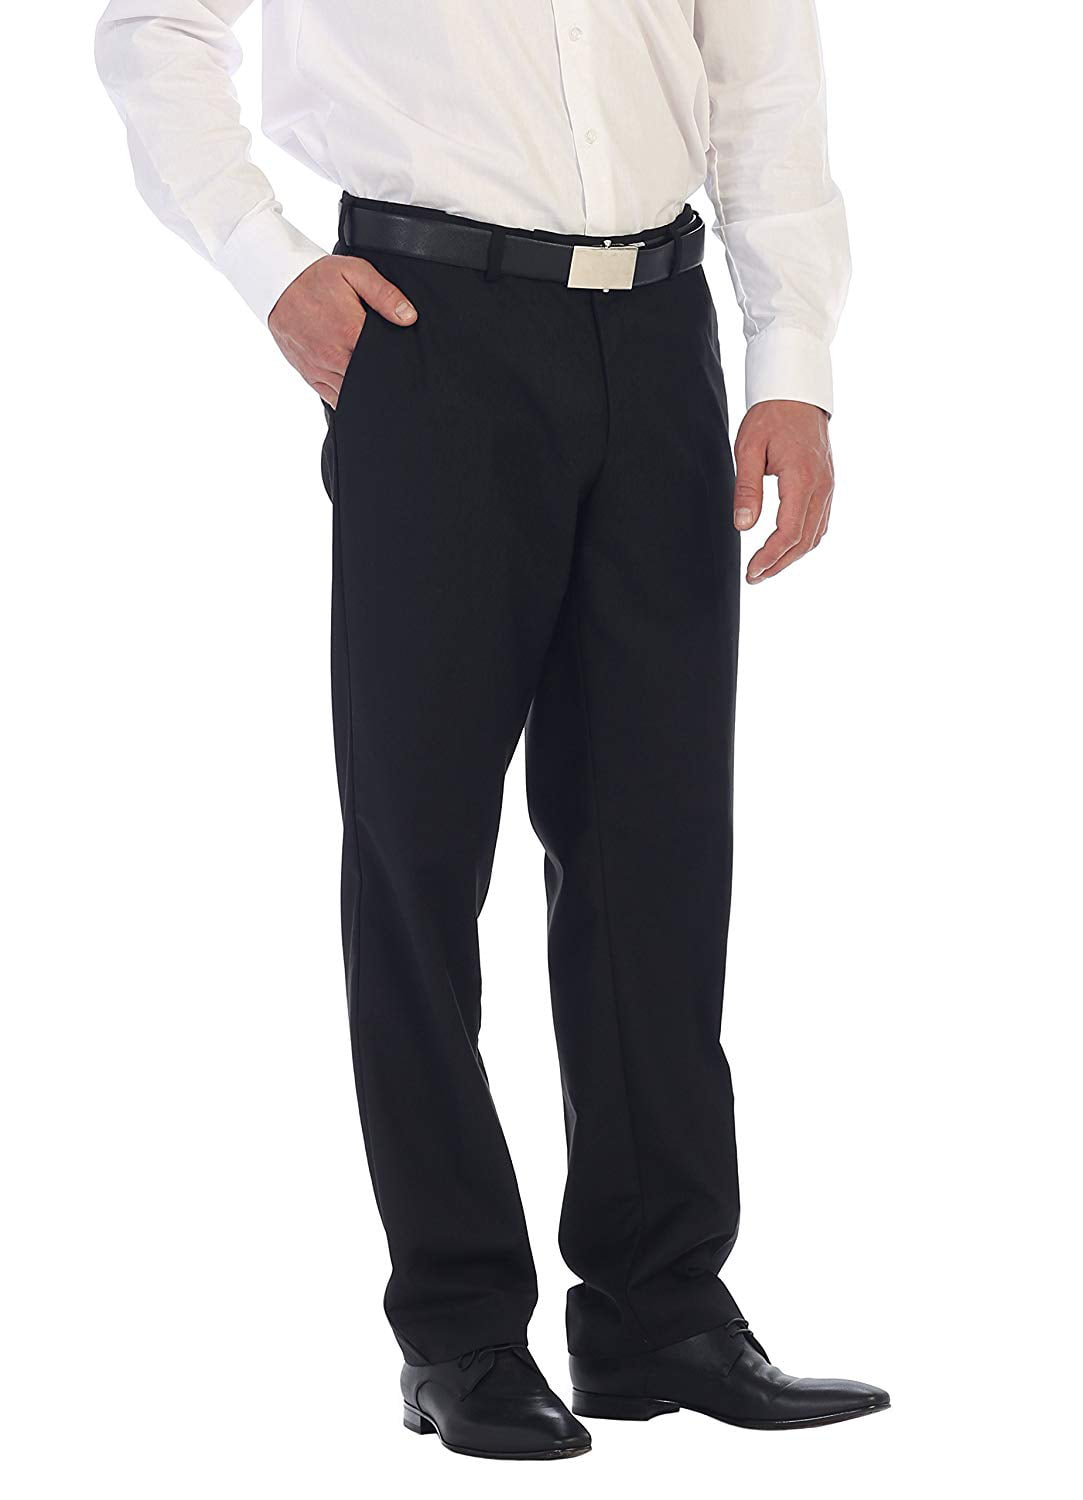 New Mens Formal Work Office Smart Trousers Pants Flat Front Size 30-60 